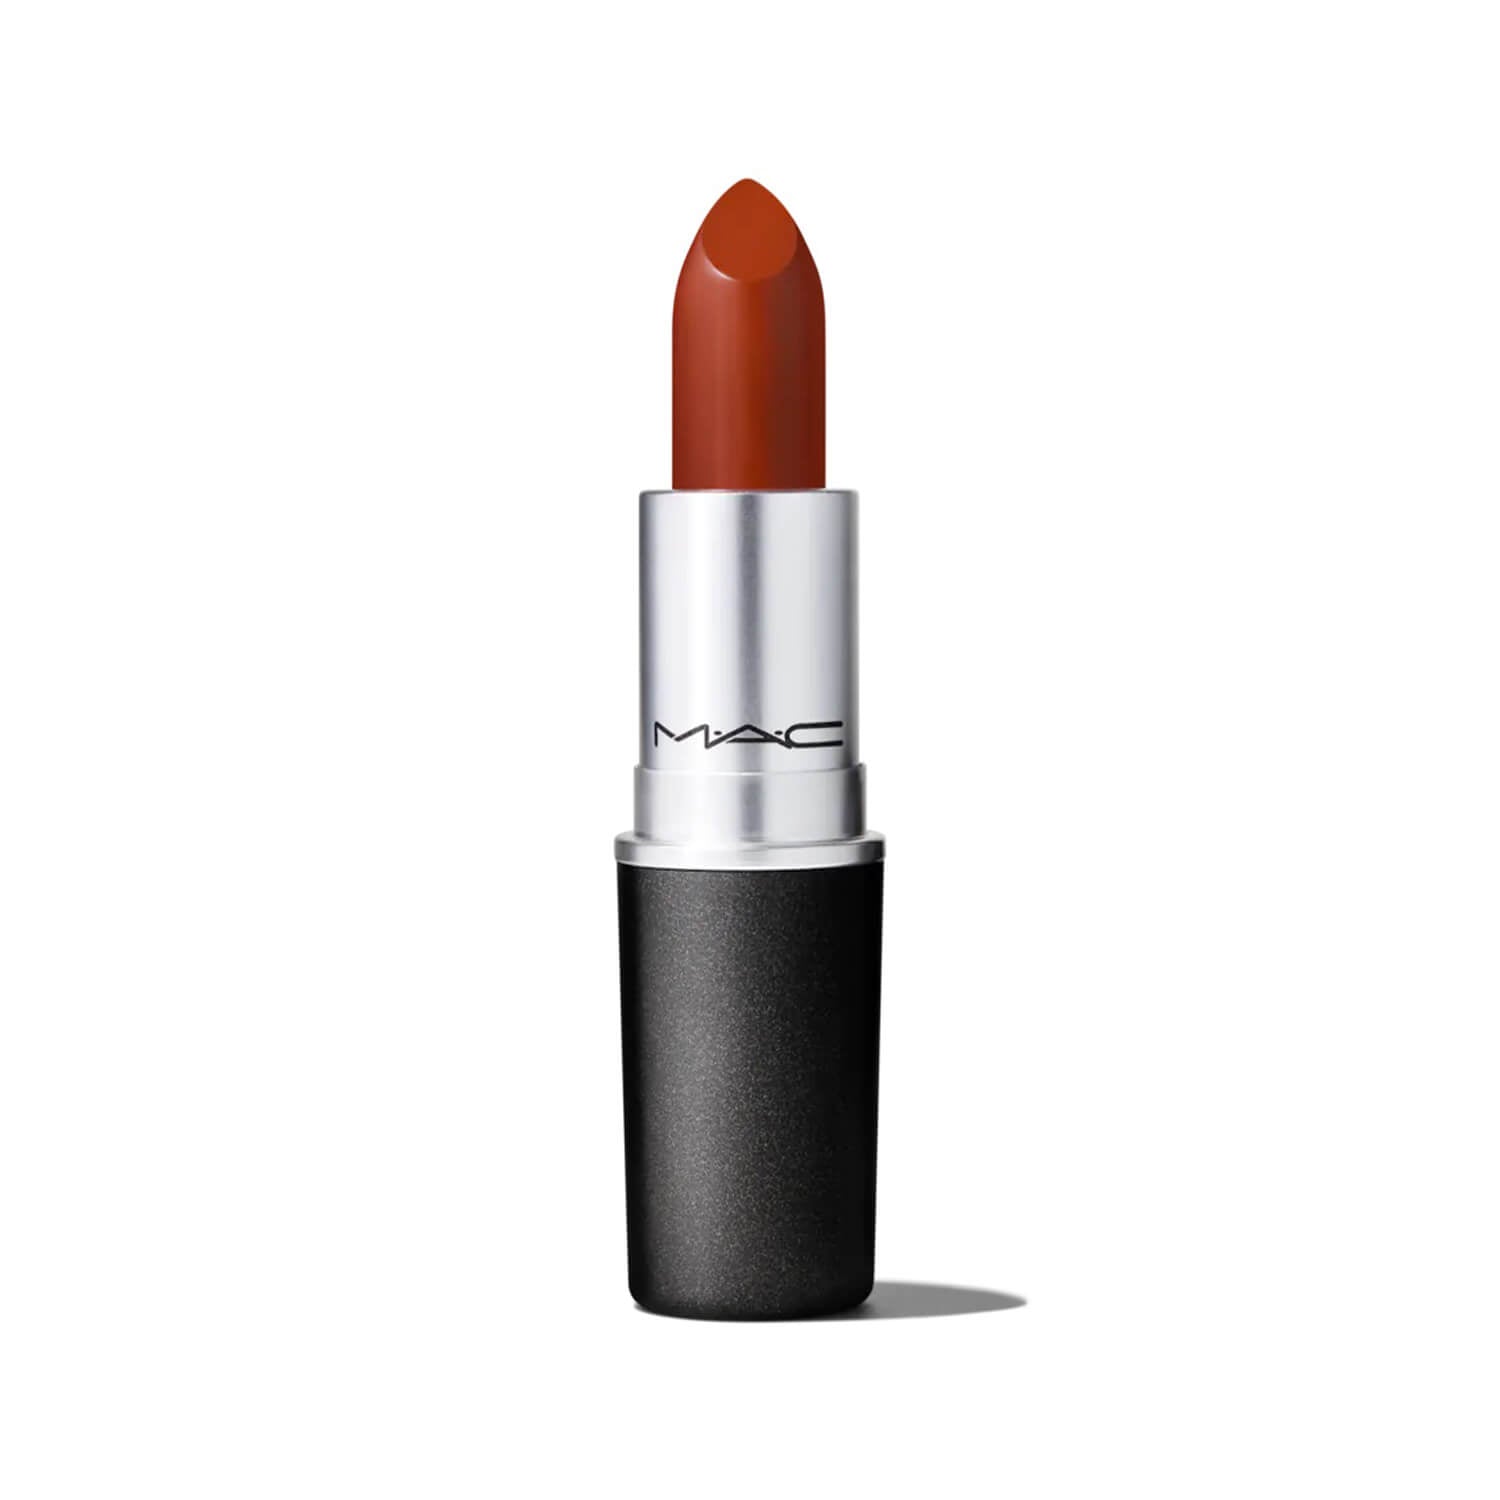 MAC matte lipstick marrakesh available at heygirl.pk for cash on delivery in Pakistan